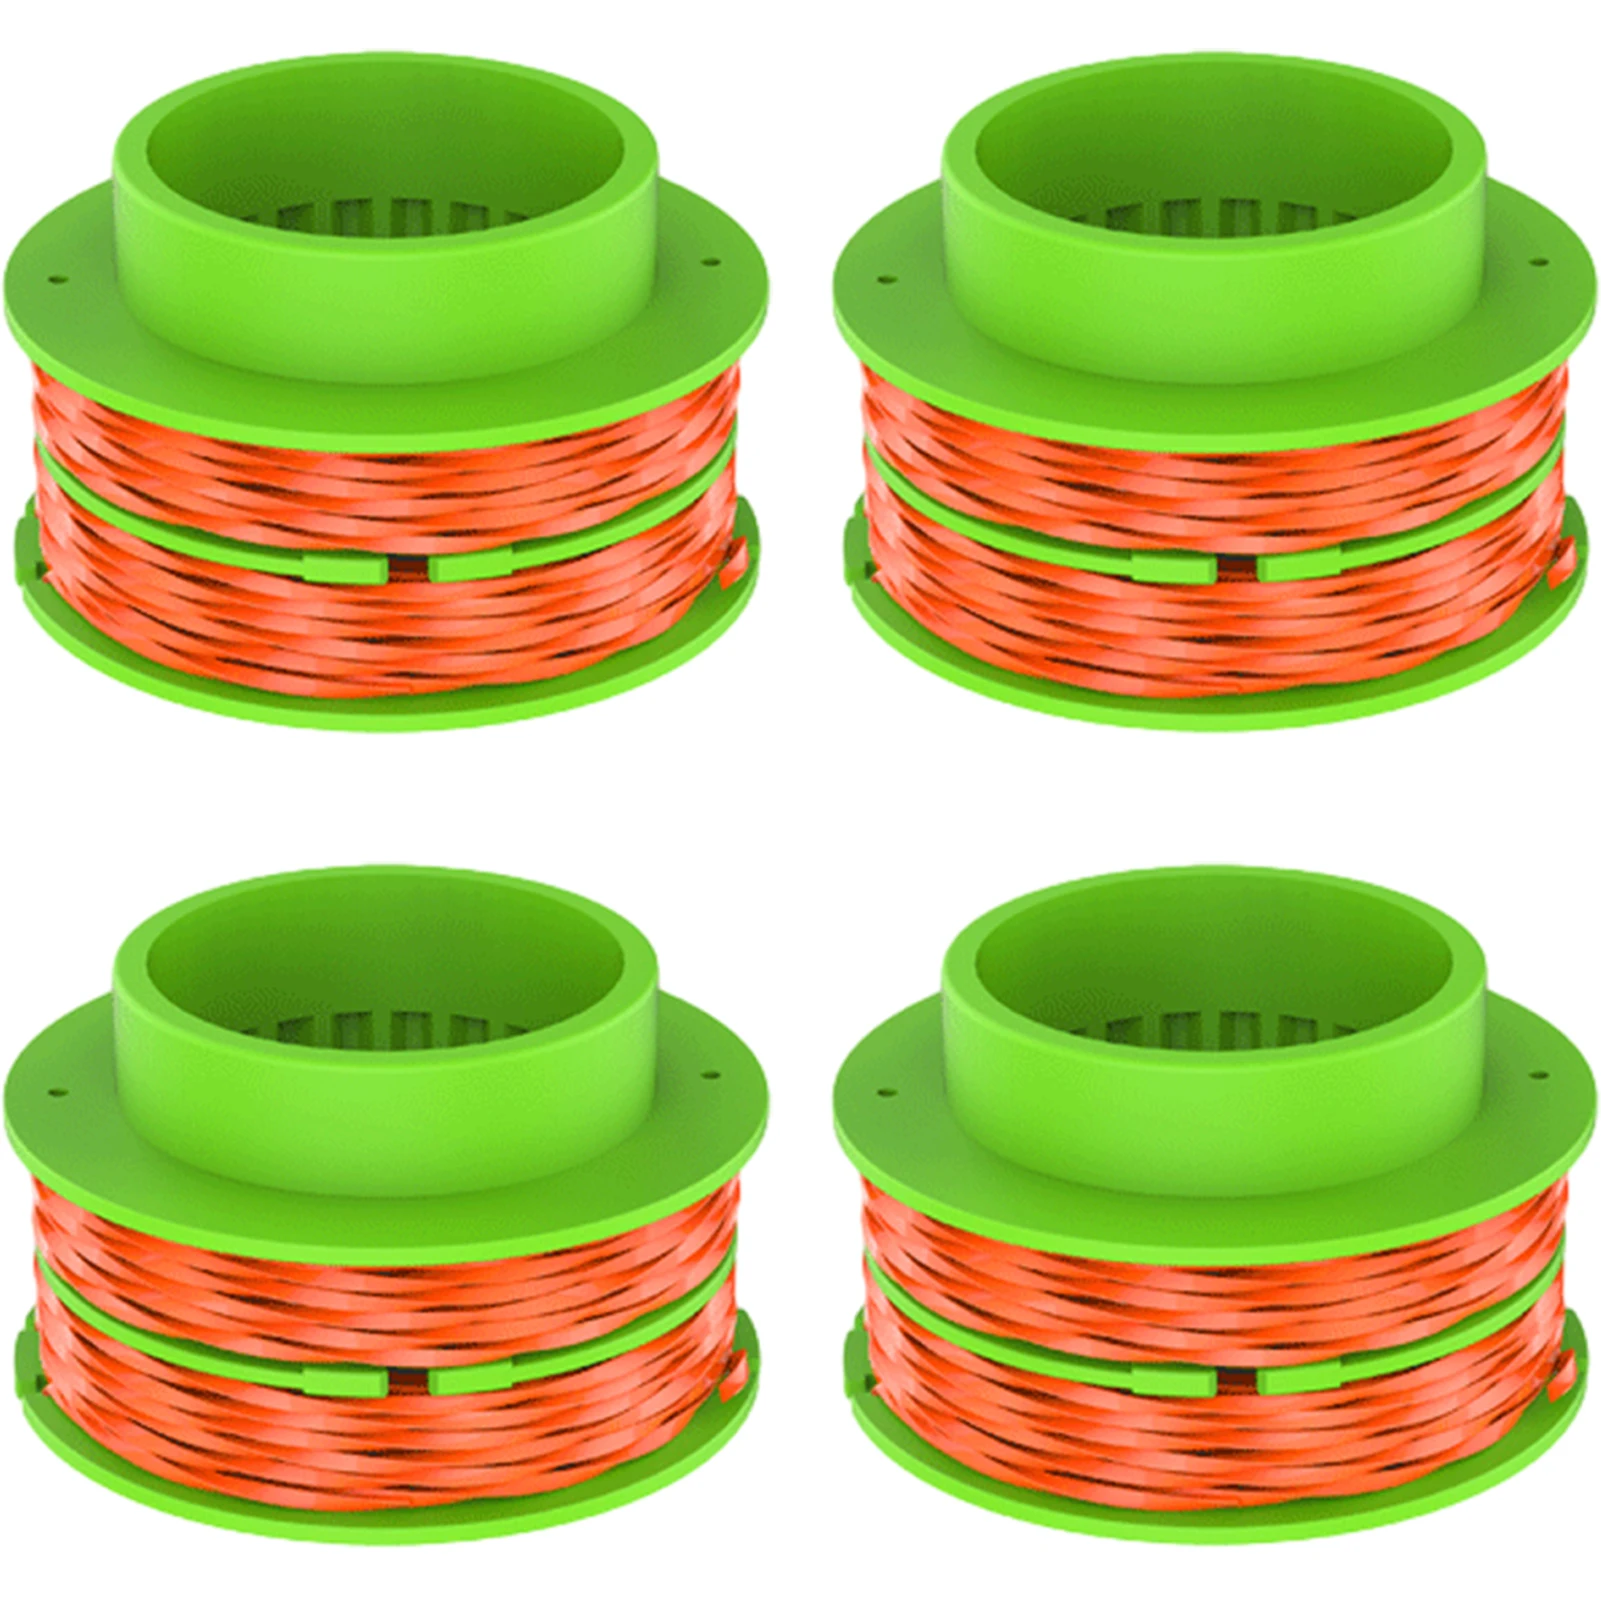 

4pcs Flexible Convenient Sturdy Save Time Dual String Easy To Use Durable Grass Trimmer Nylon Spool Line High Compatibility